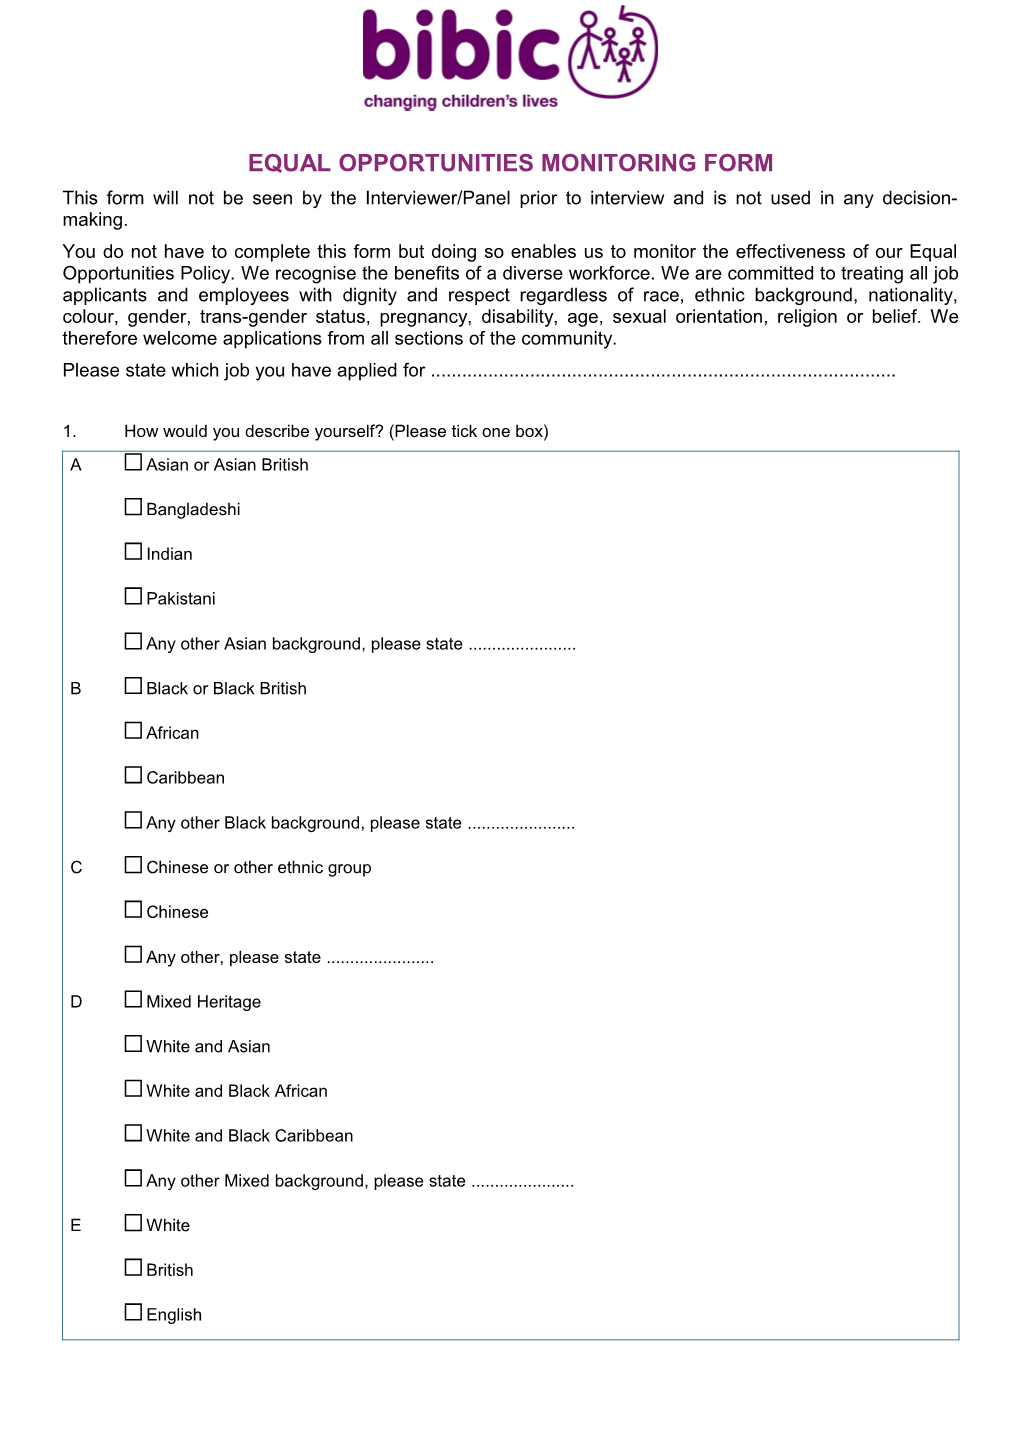 Equal Opportunities Monitoring Form s5